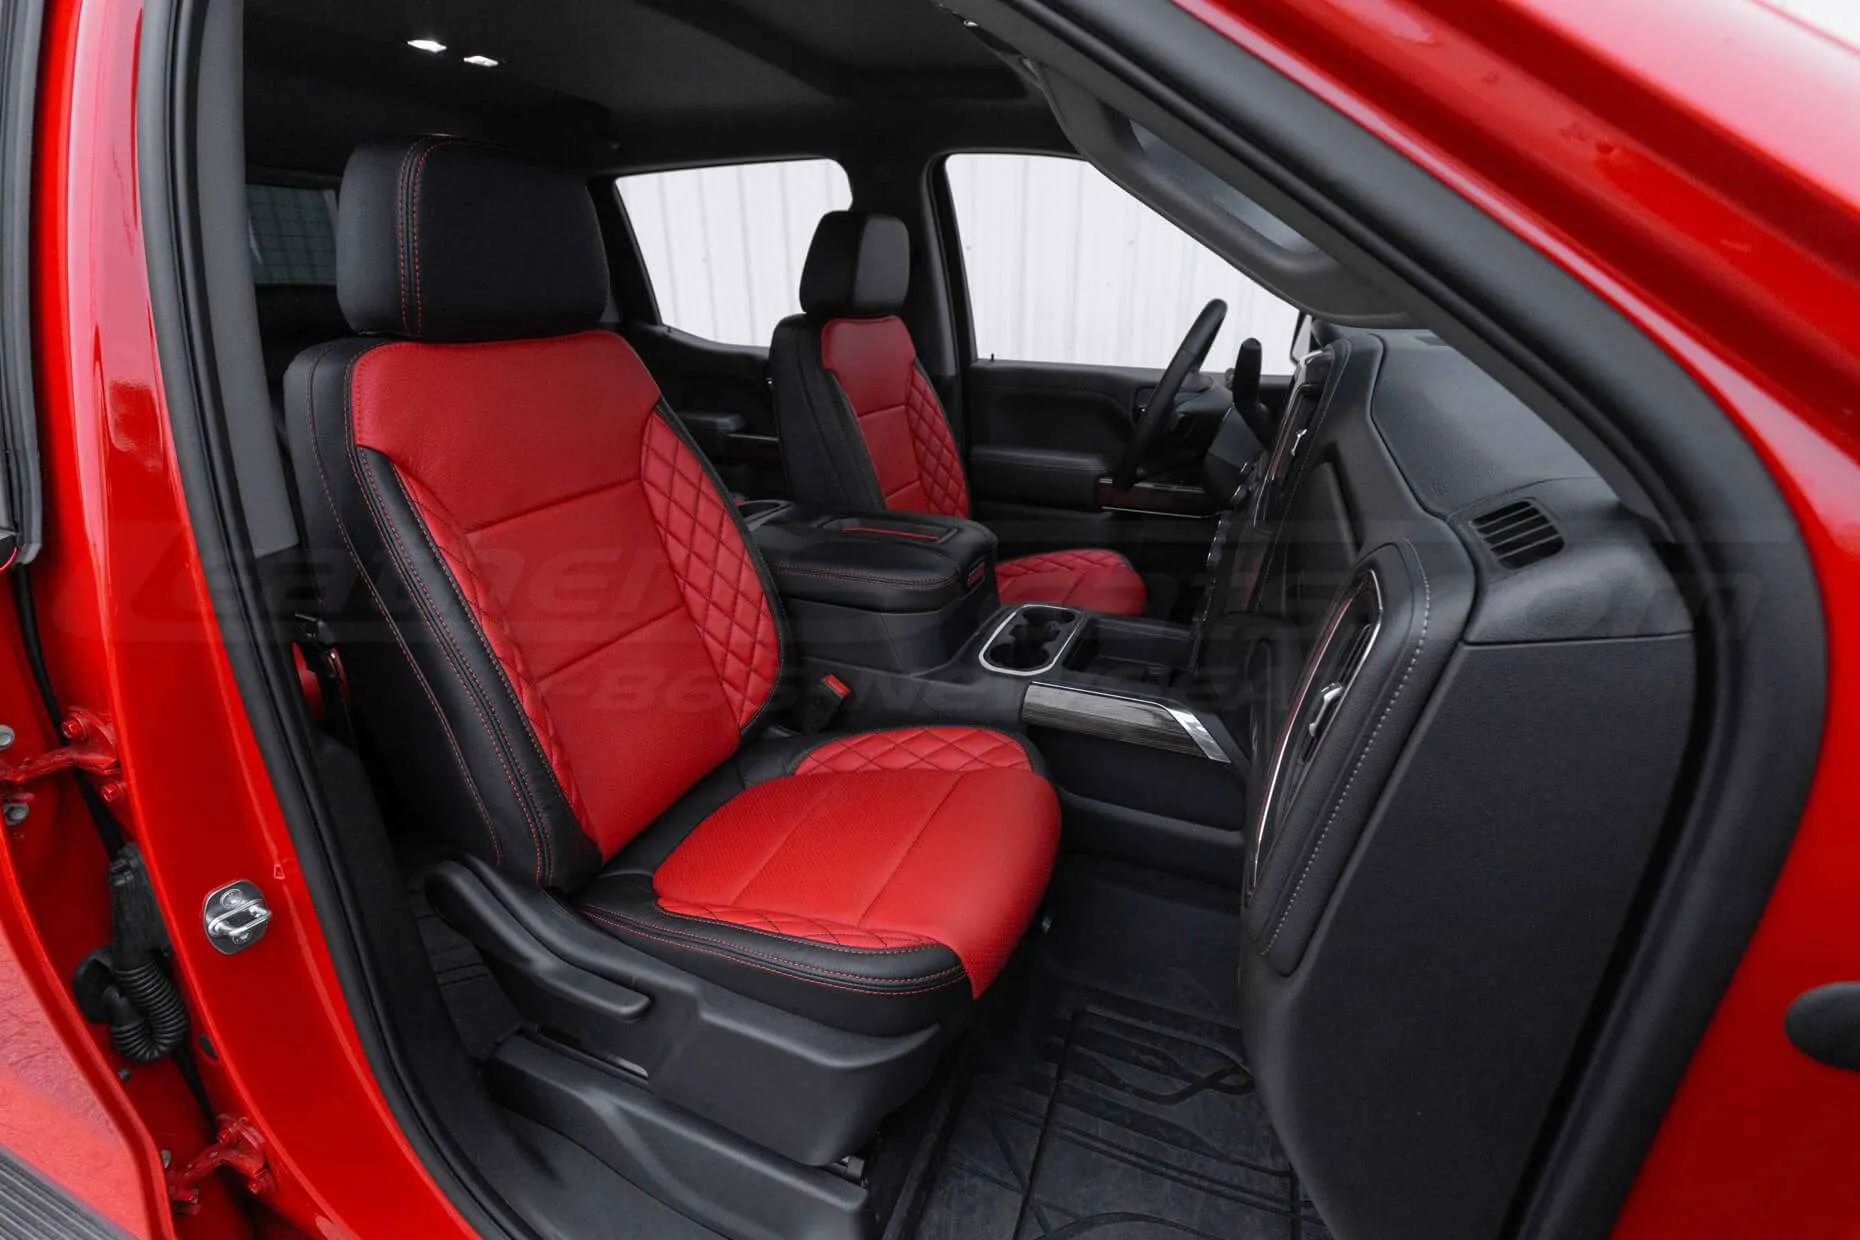 2019-2021 Chevrolet Silverado CNC Stitched Leather Seats - Front interior from passenger side